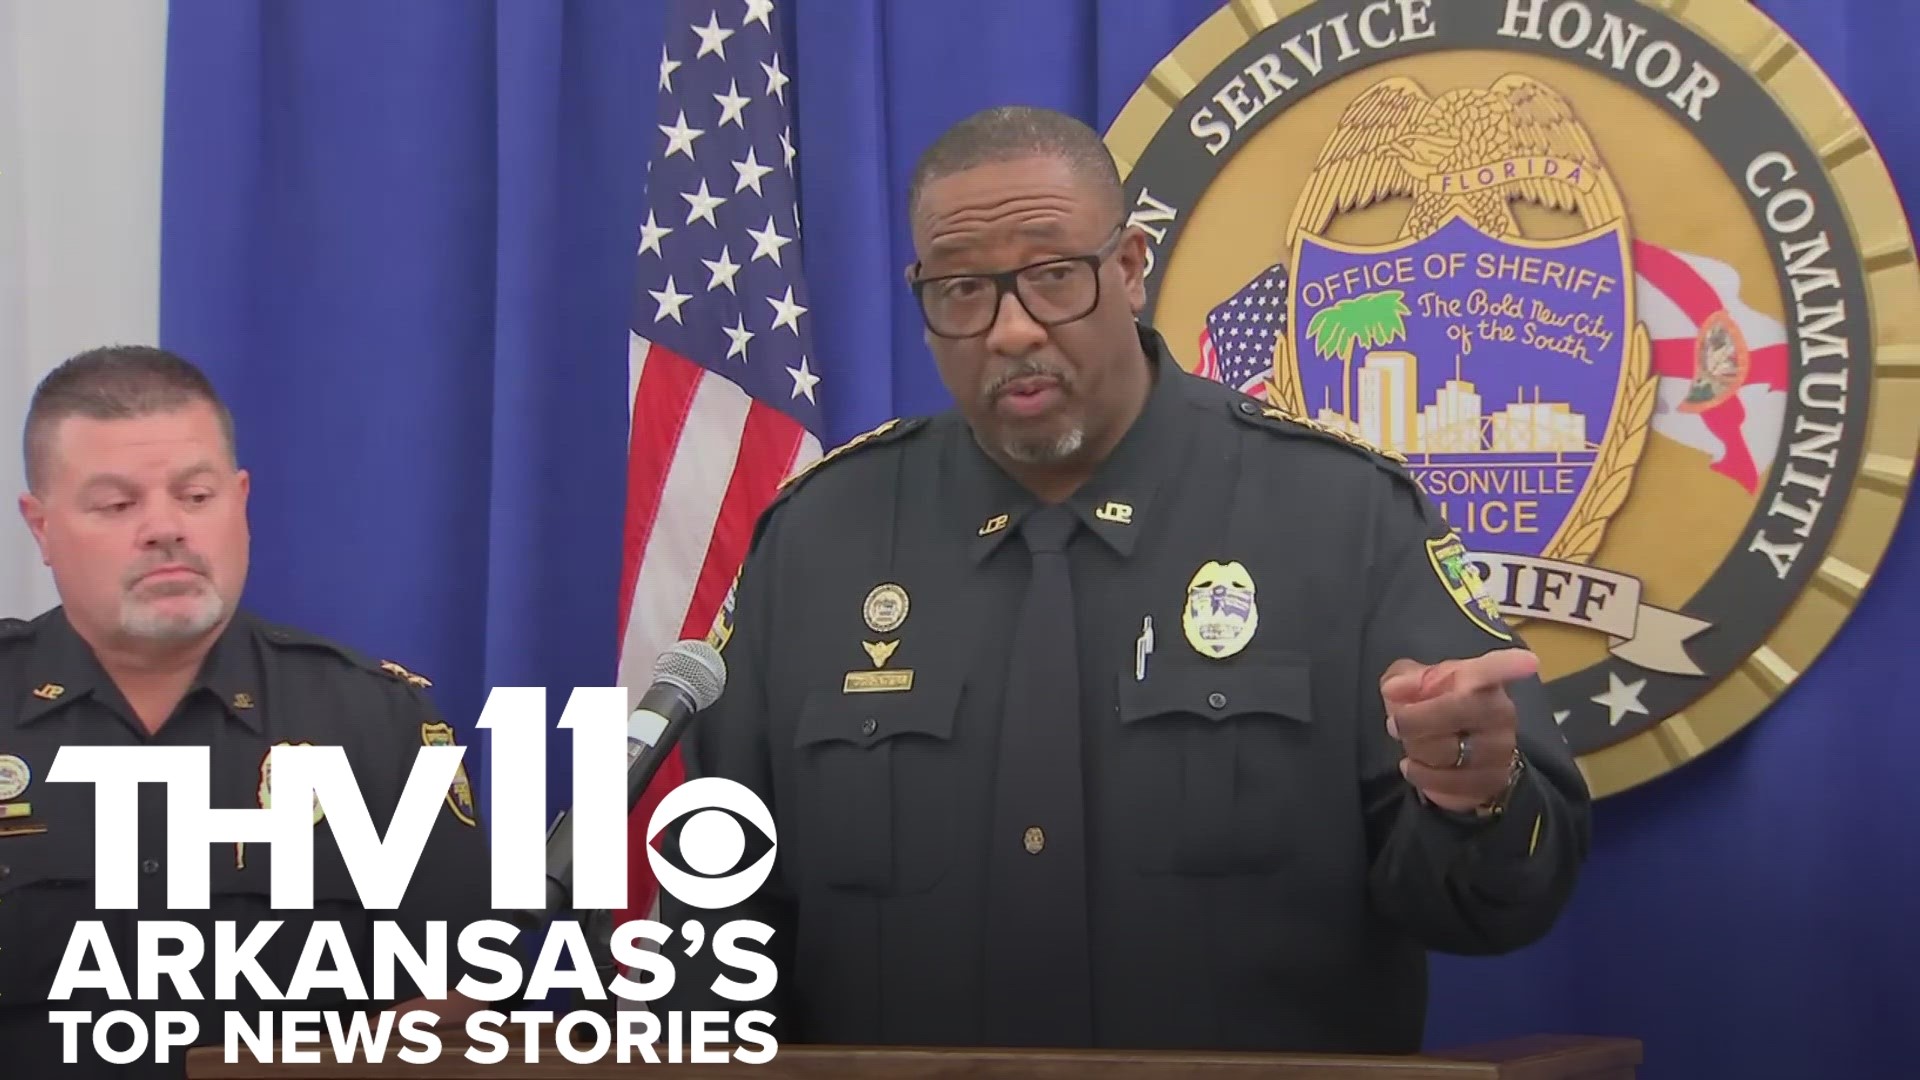 Sarah Horbacewicz delivers Arkansas's top news stories for August 27, 2023, including the latest information on a deadly mass shooting in Jacksonville, Florida.